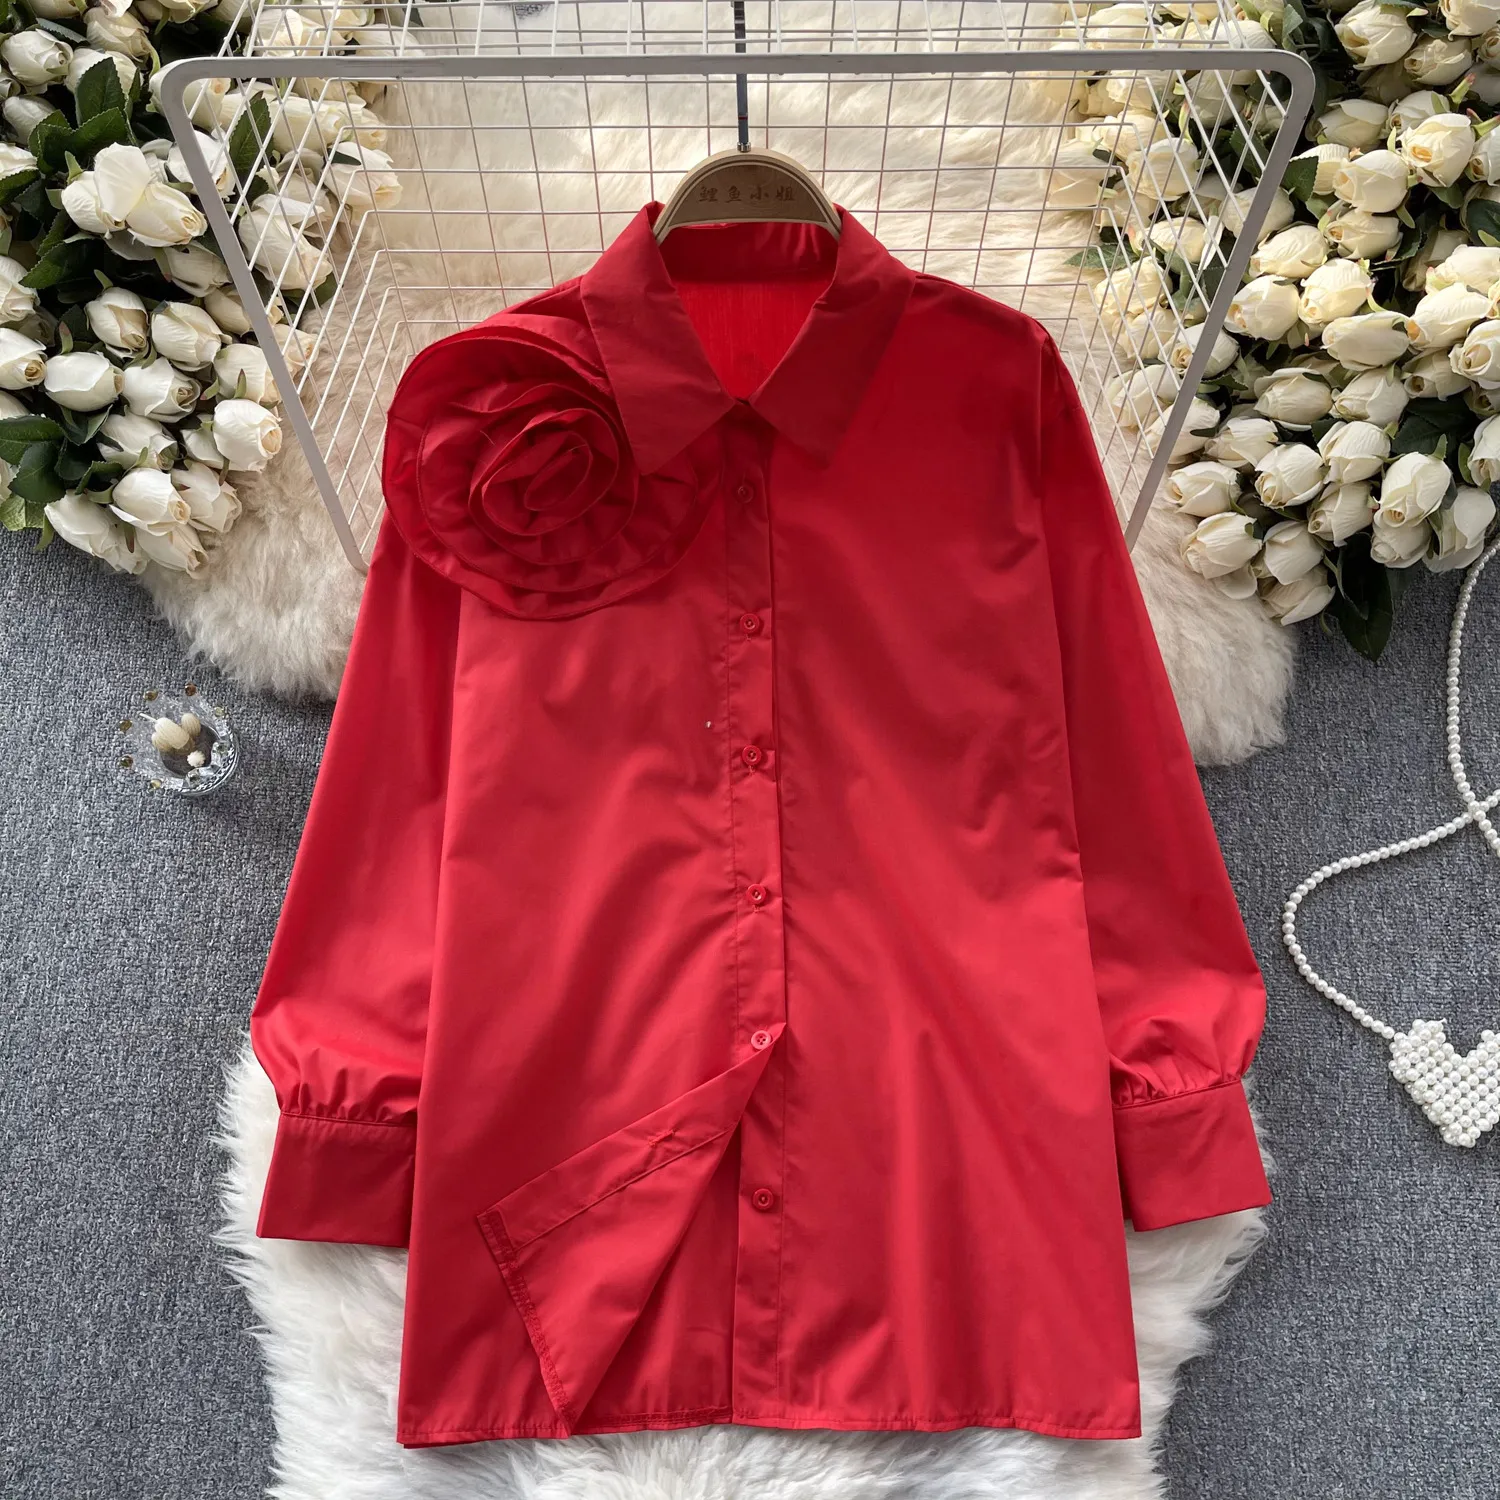 European style oversized shirt, women's design sense, three-dimensional flower loose and slimming, fashionable and versatile long sleeved top, spring dress, women's new style